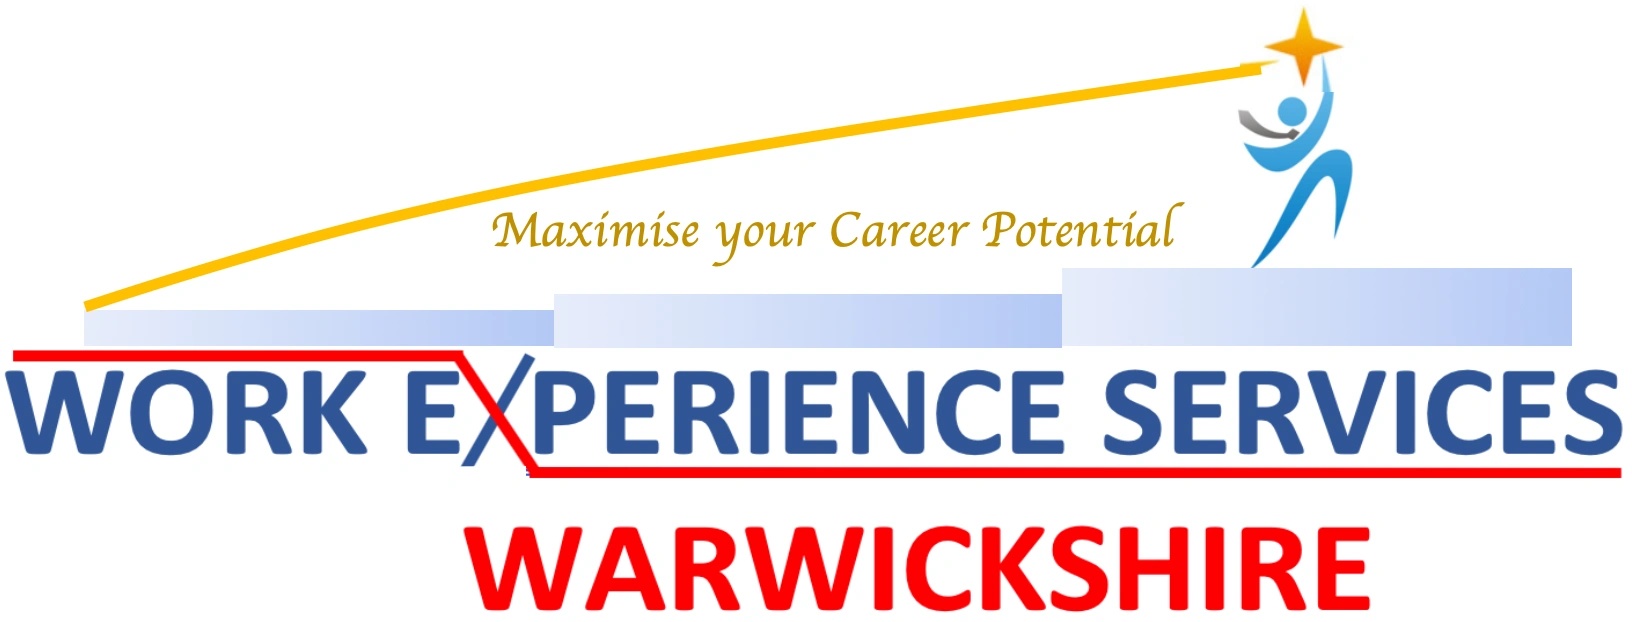 Work Experience Services